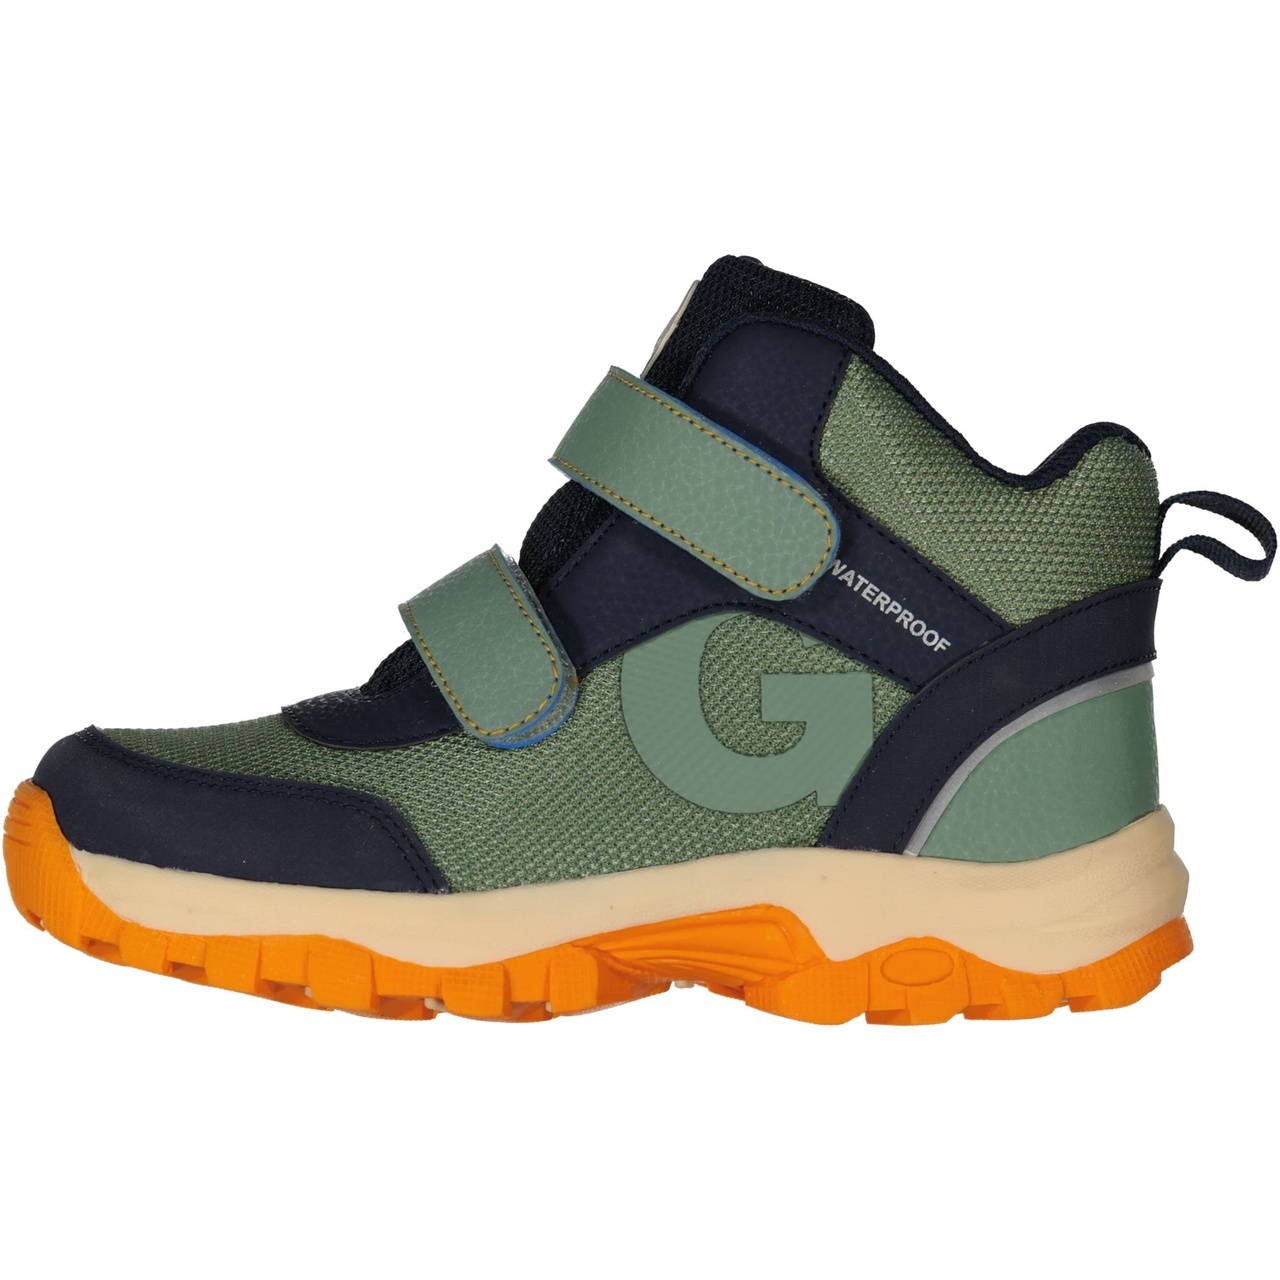 All weather shoes Moss green  32 (21 cm)